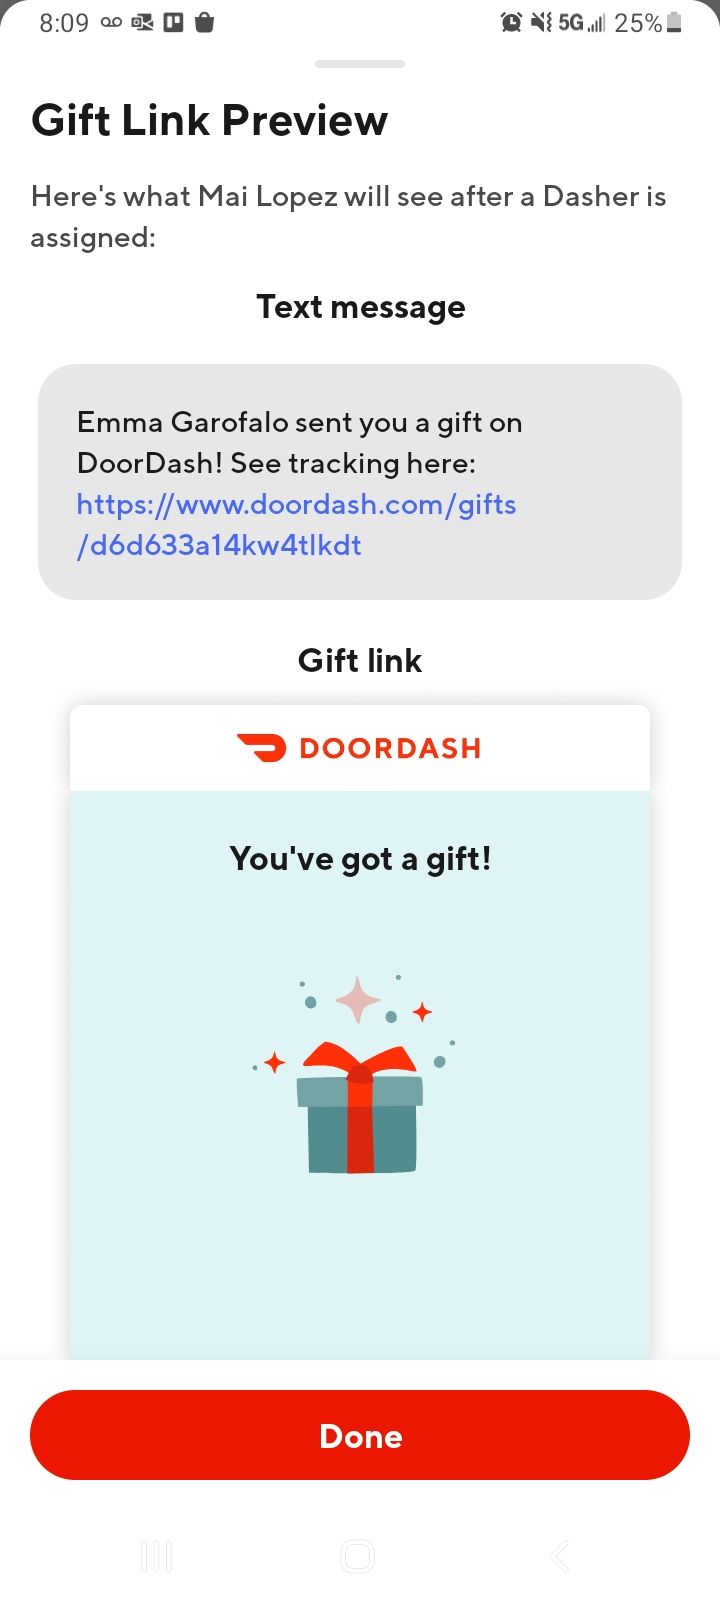 The virtual tracker for our DoorDash gift.